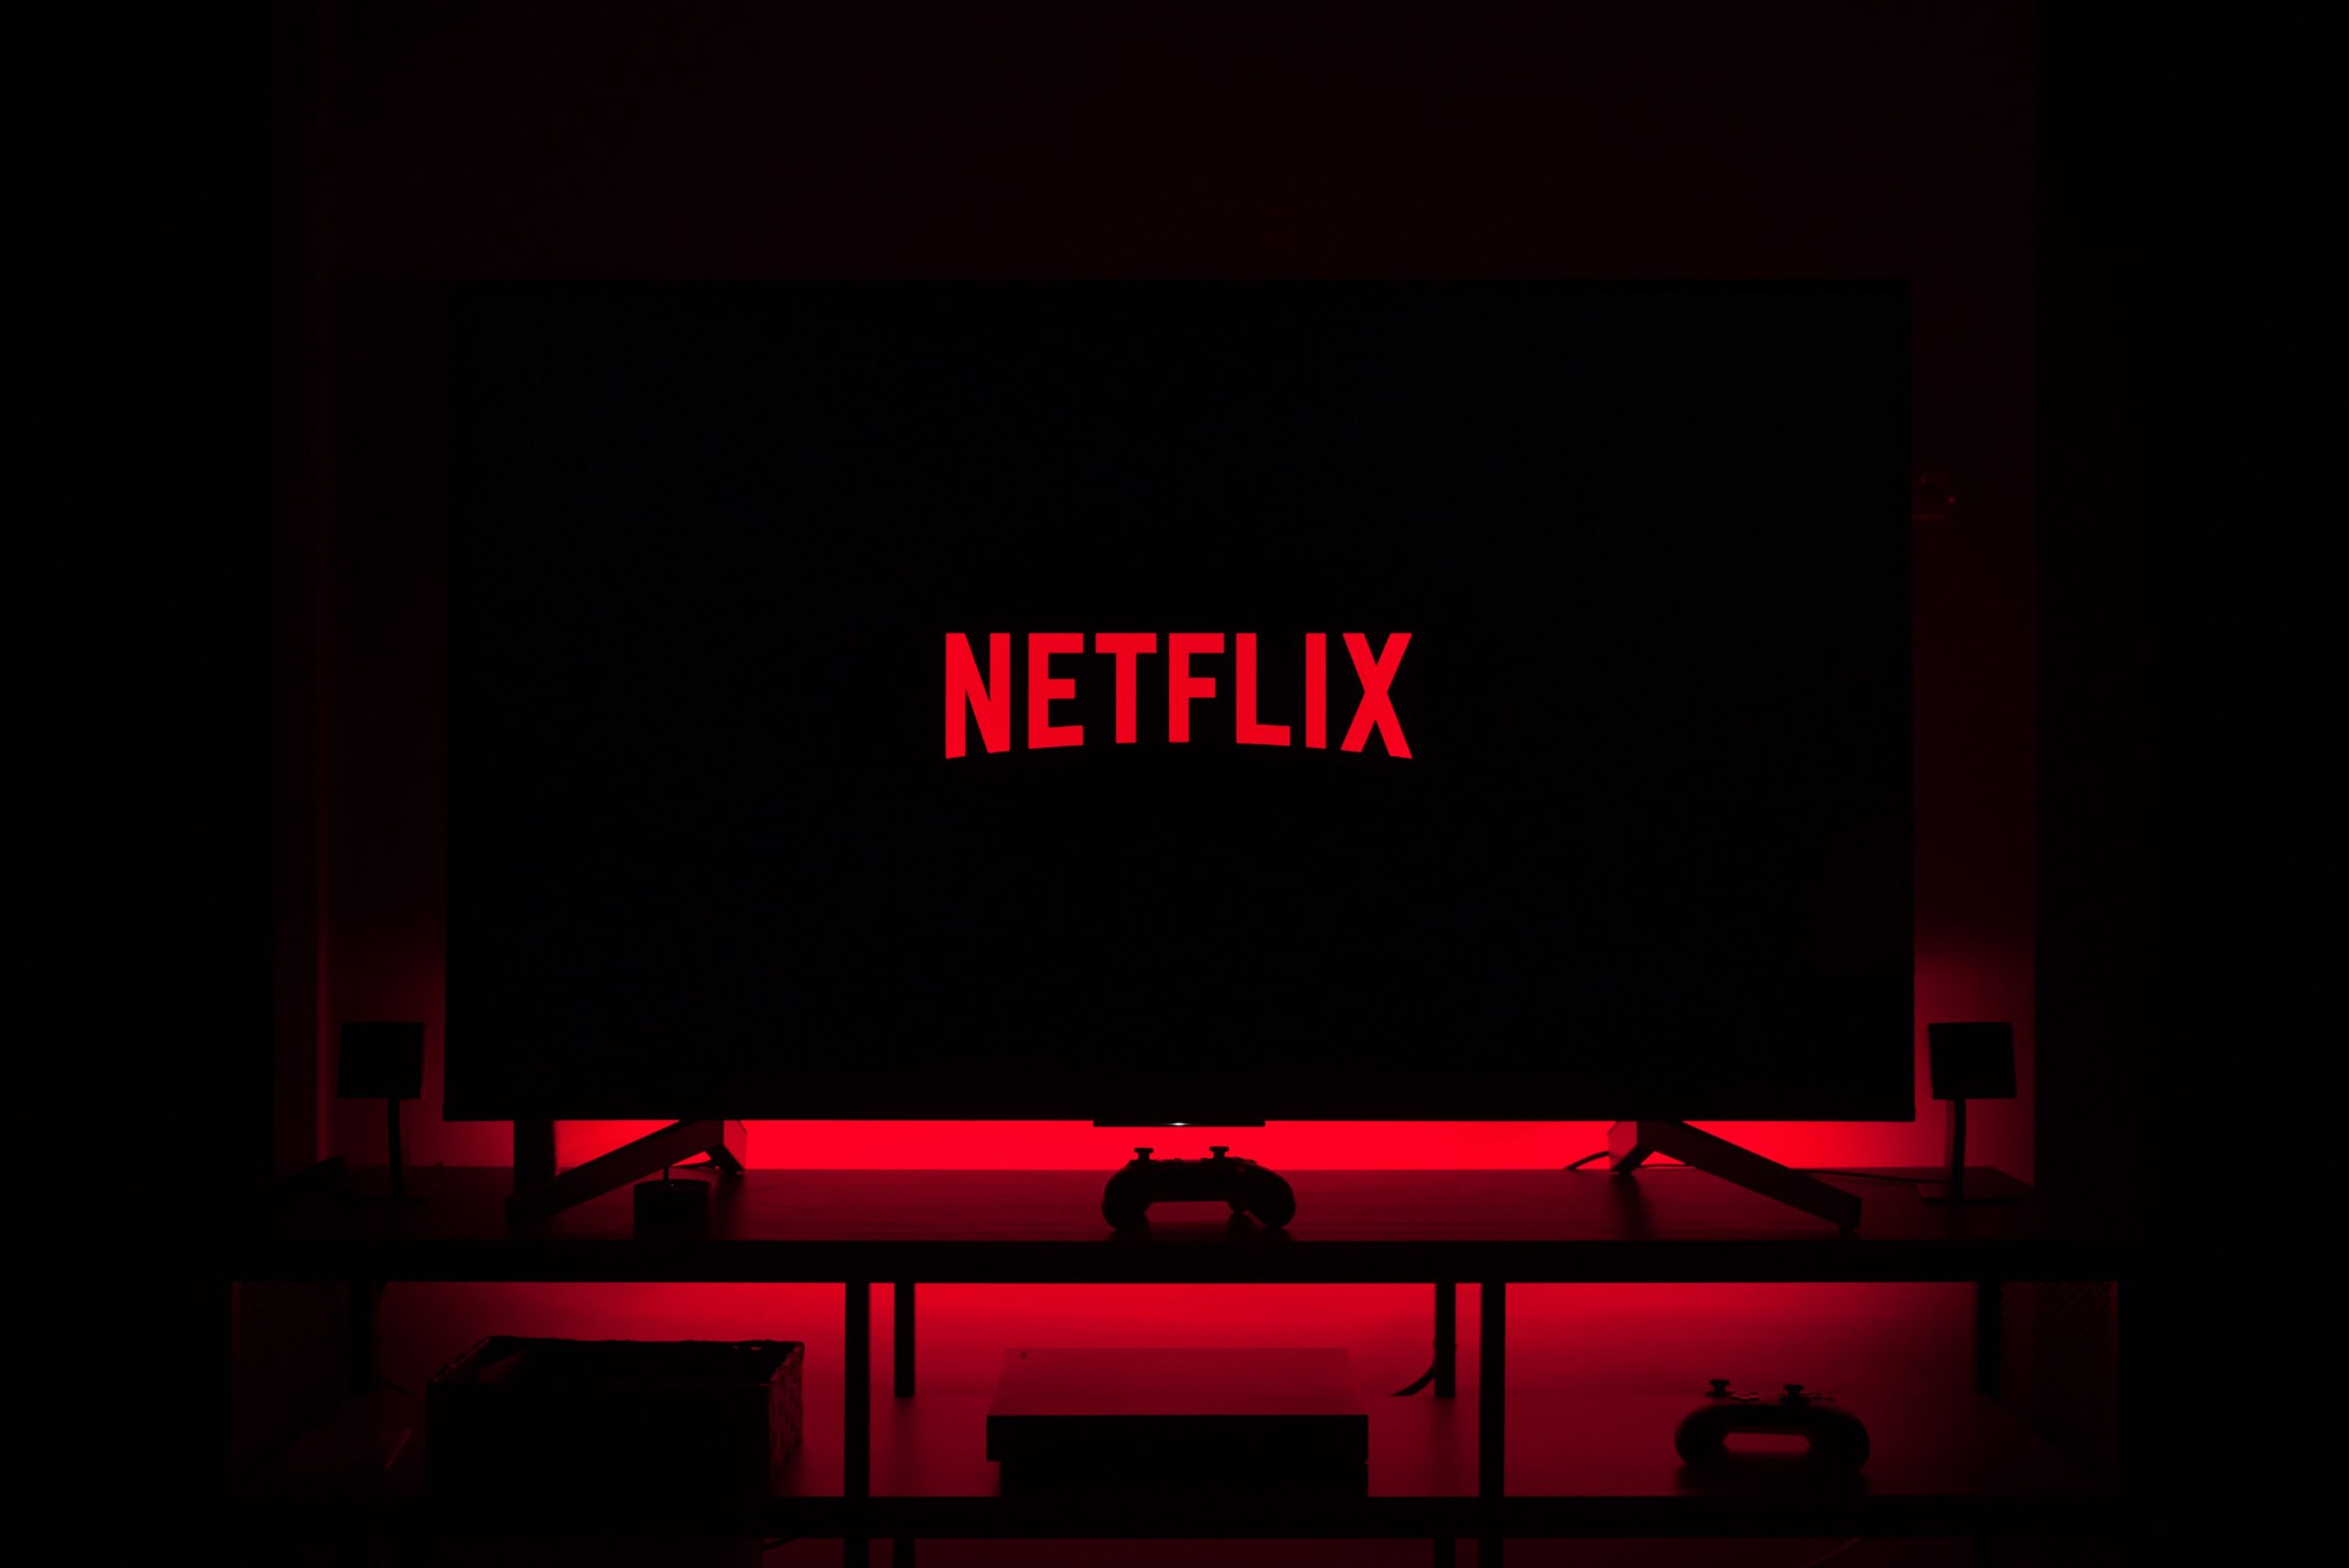 Netflix’s new subscription tier ‘Basic with Ads’: All you need to know